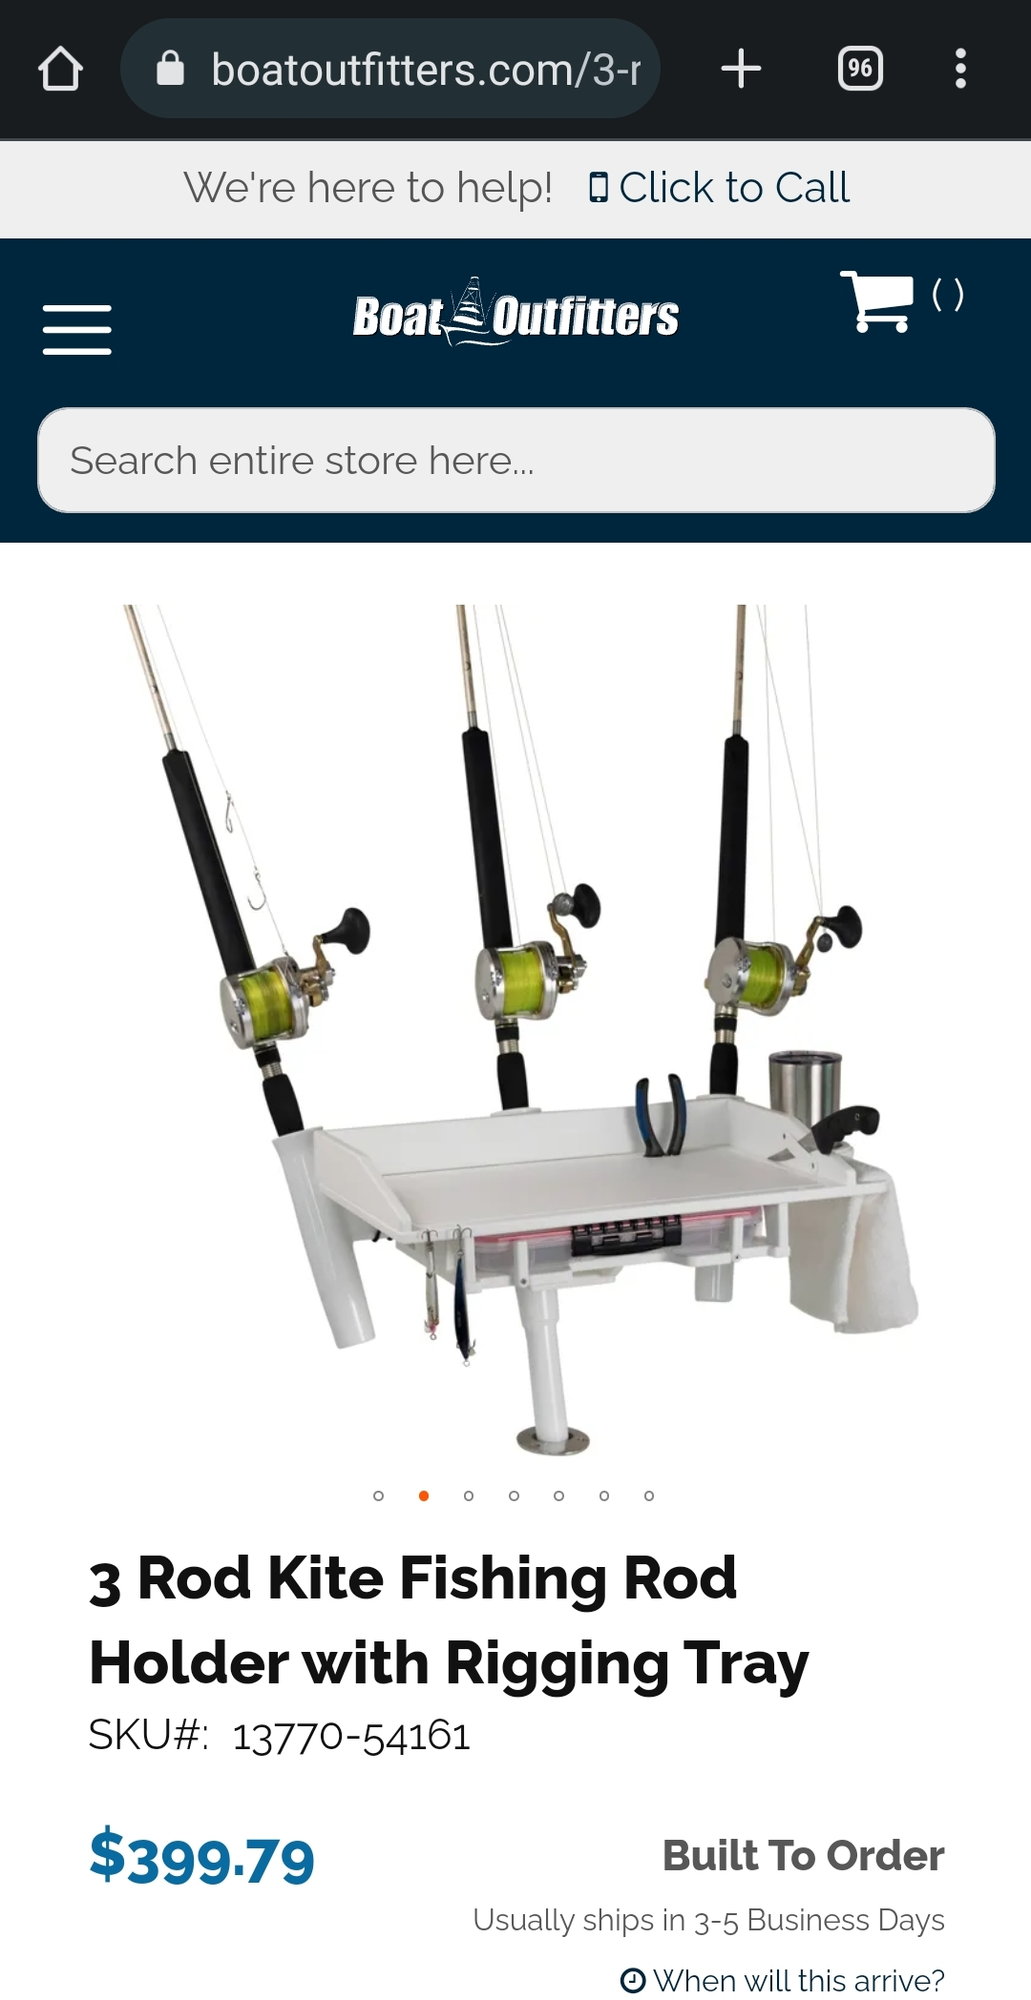 Boat Outfitters - Trident rod holder, cutting board & rigging